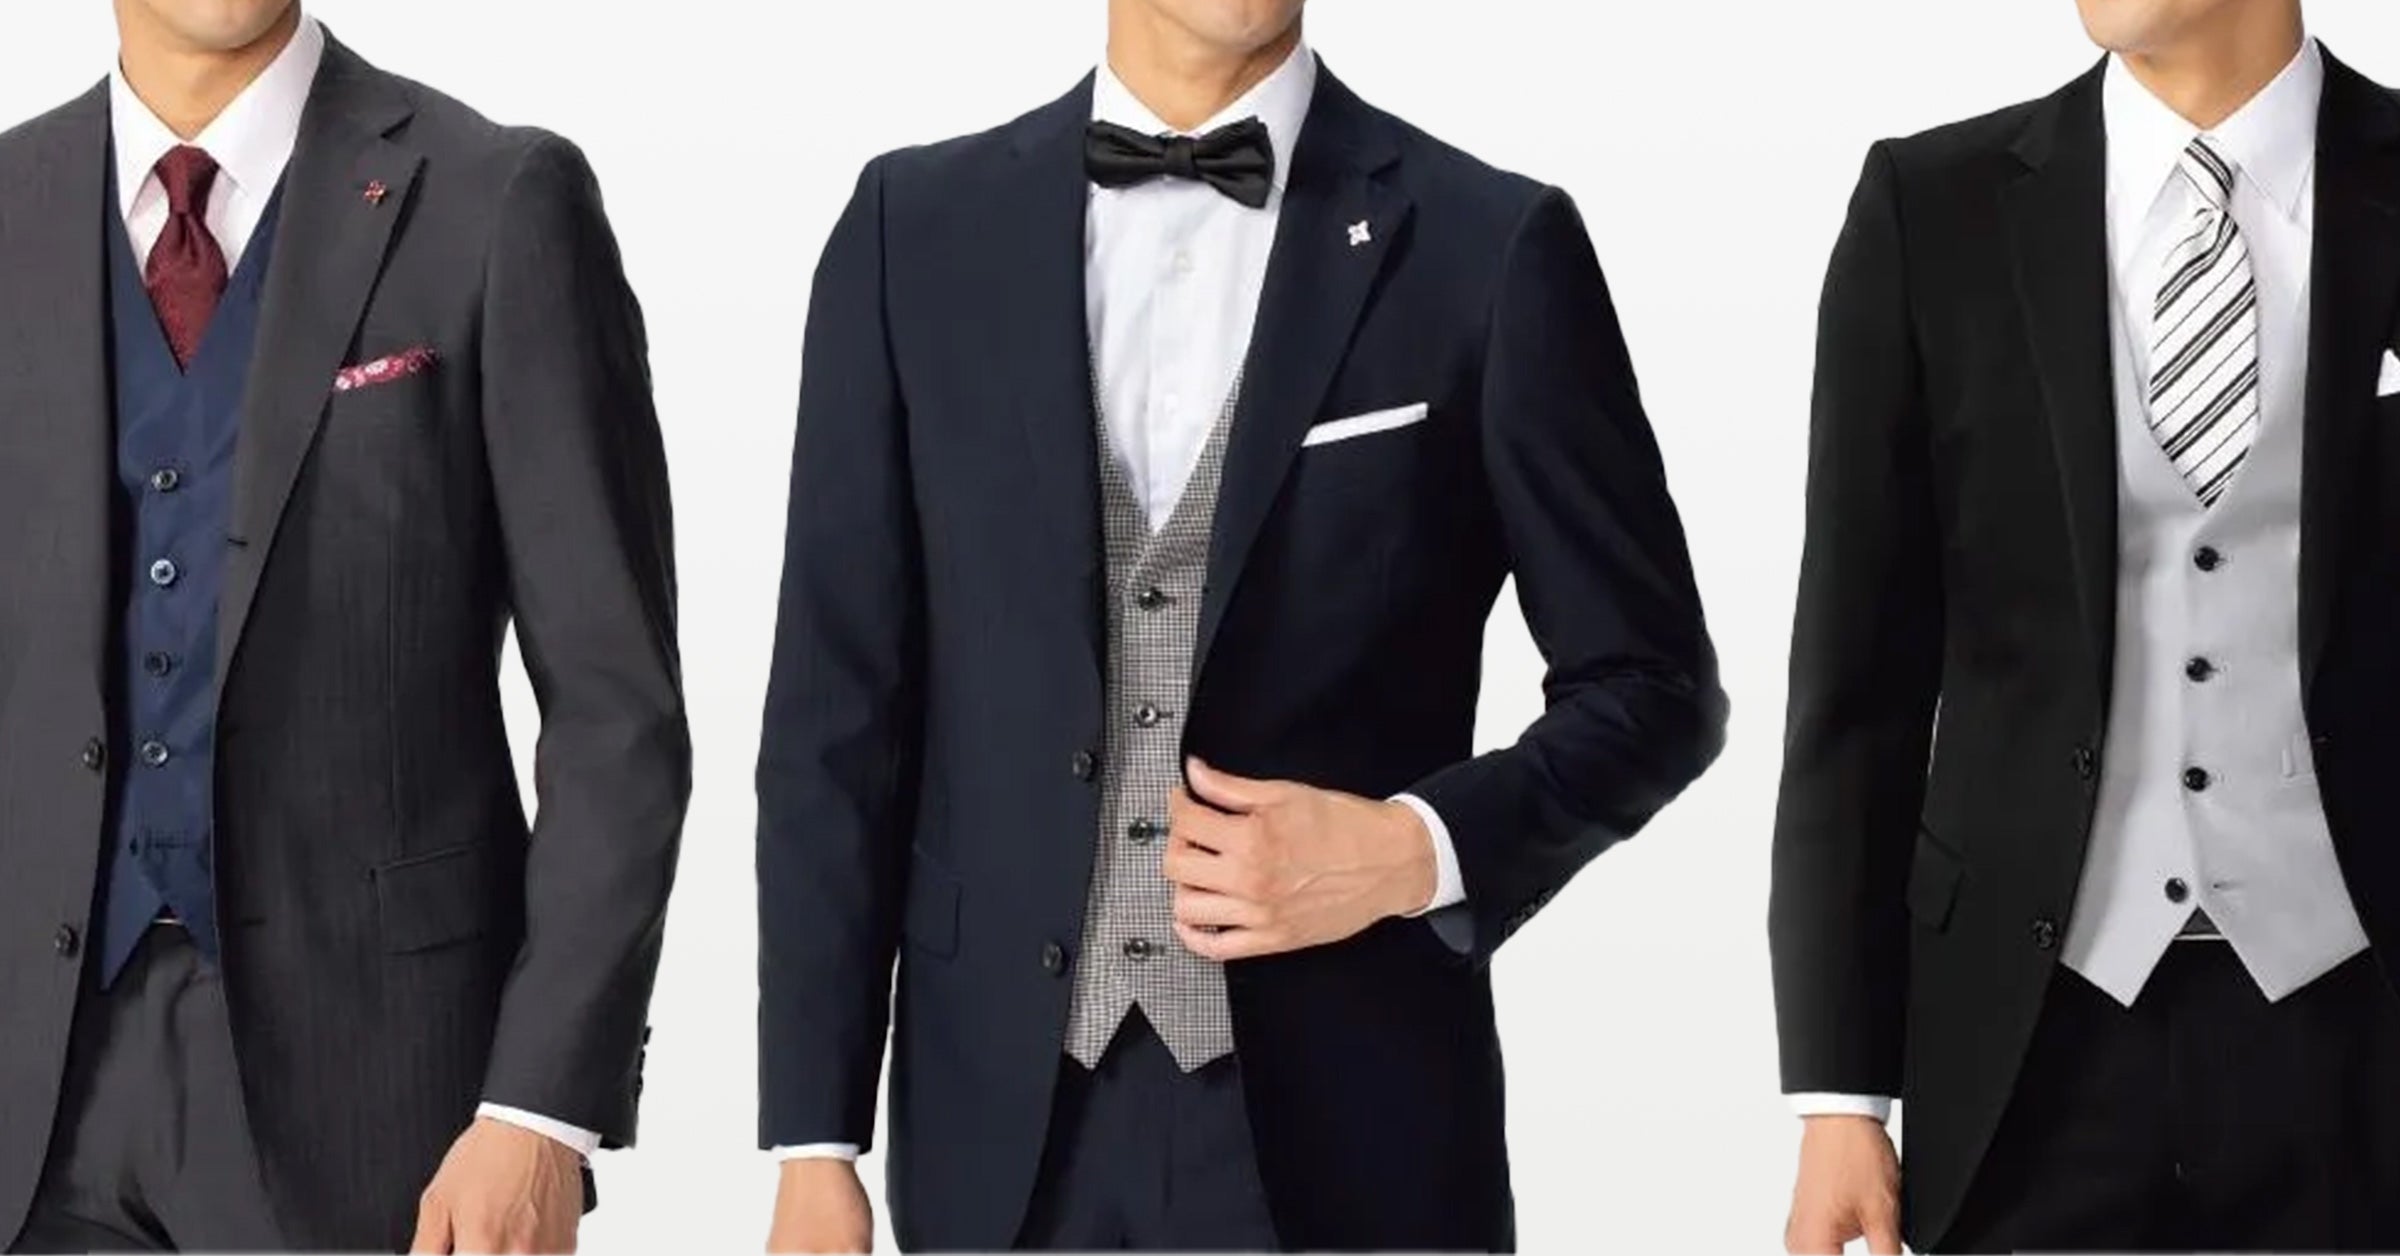 Are you preparing to attend a special wedding day? Men’s suit styles that never fail to look good